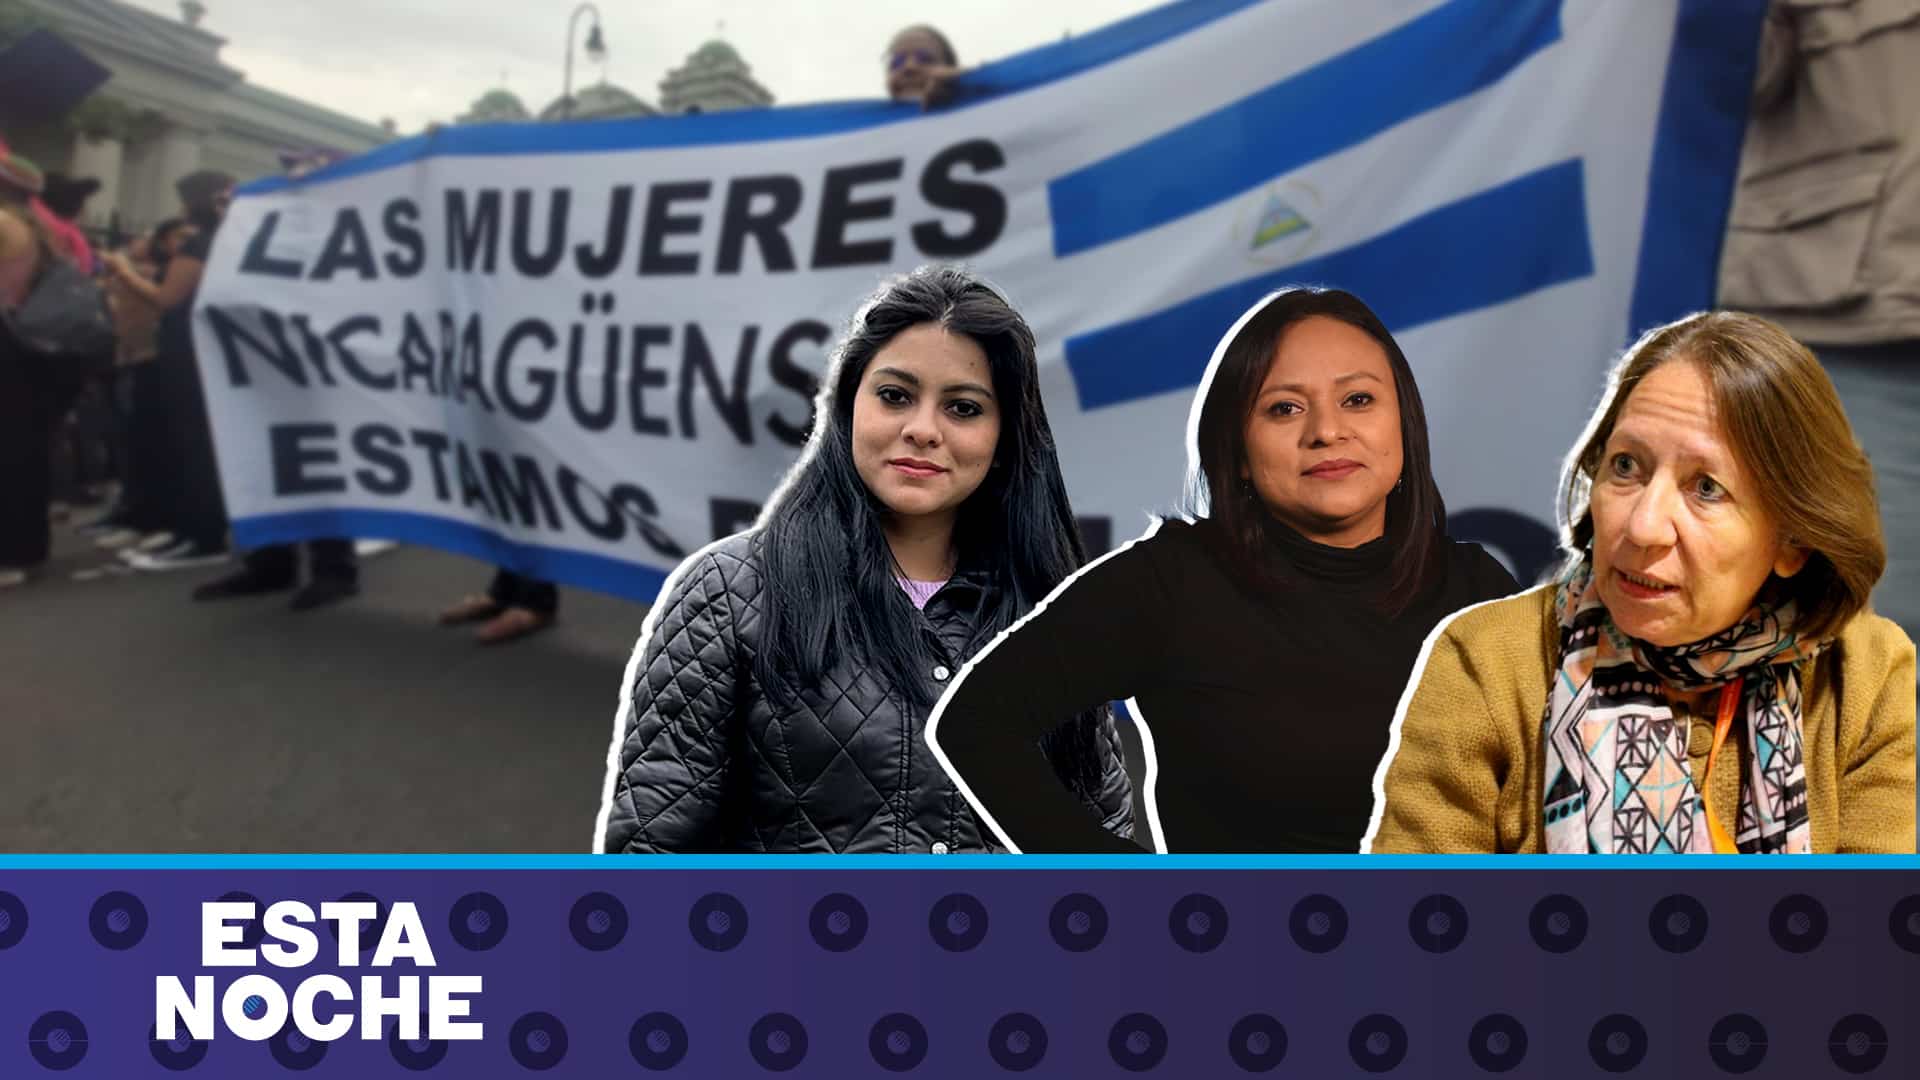 Mujeres nicaraguenses